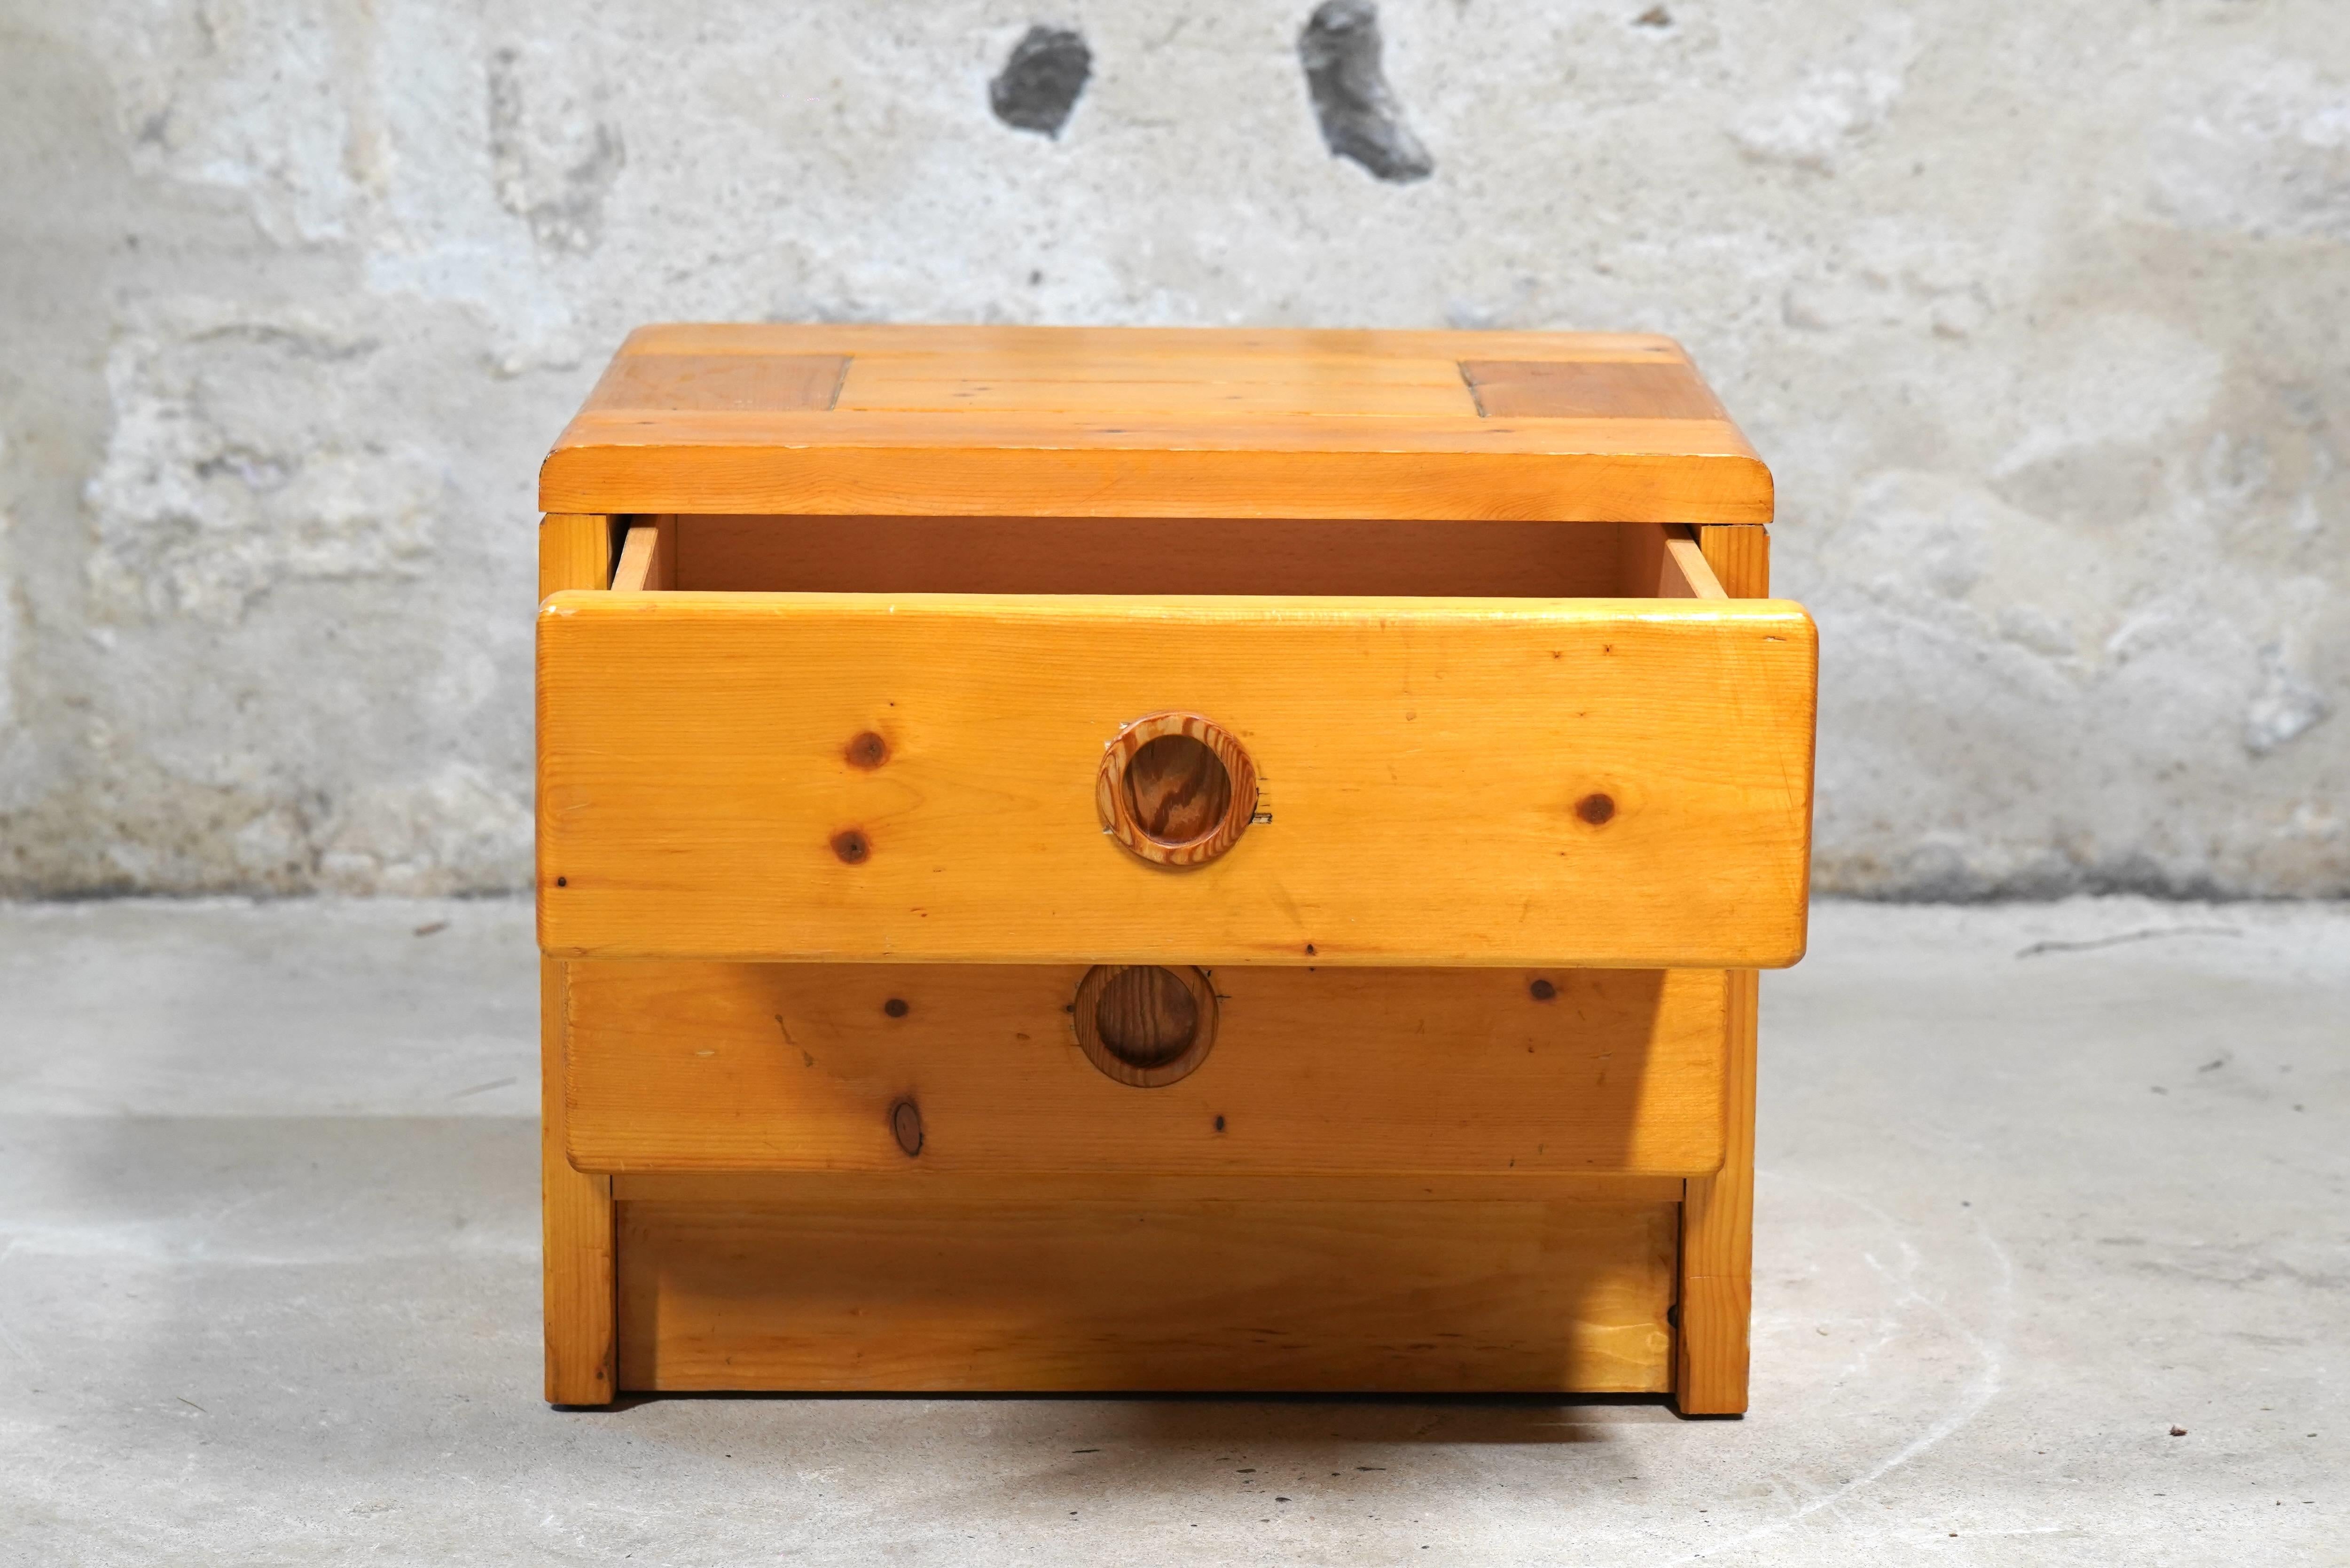 Fin du 20e siècle Charlotte Perriand Night Stand from Les Arcs in Savoie, France c. C. 1970 en vente